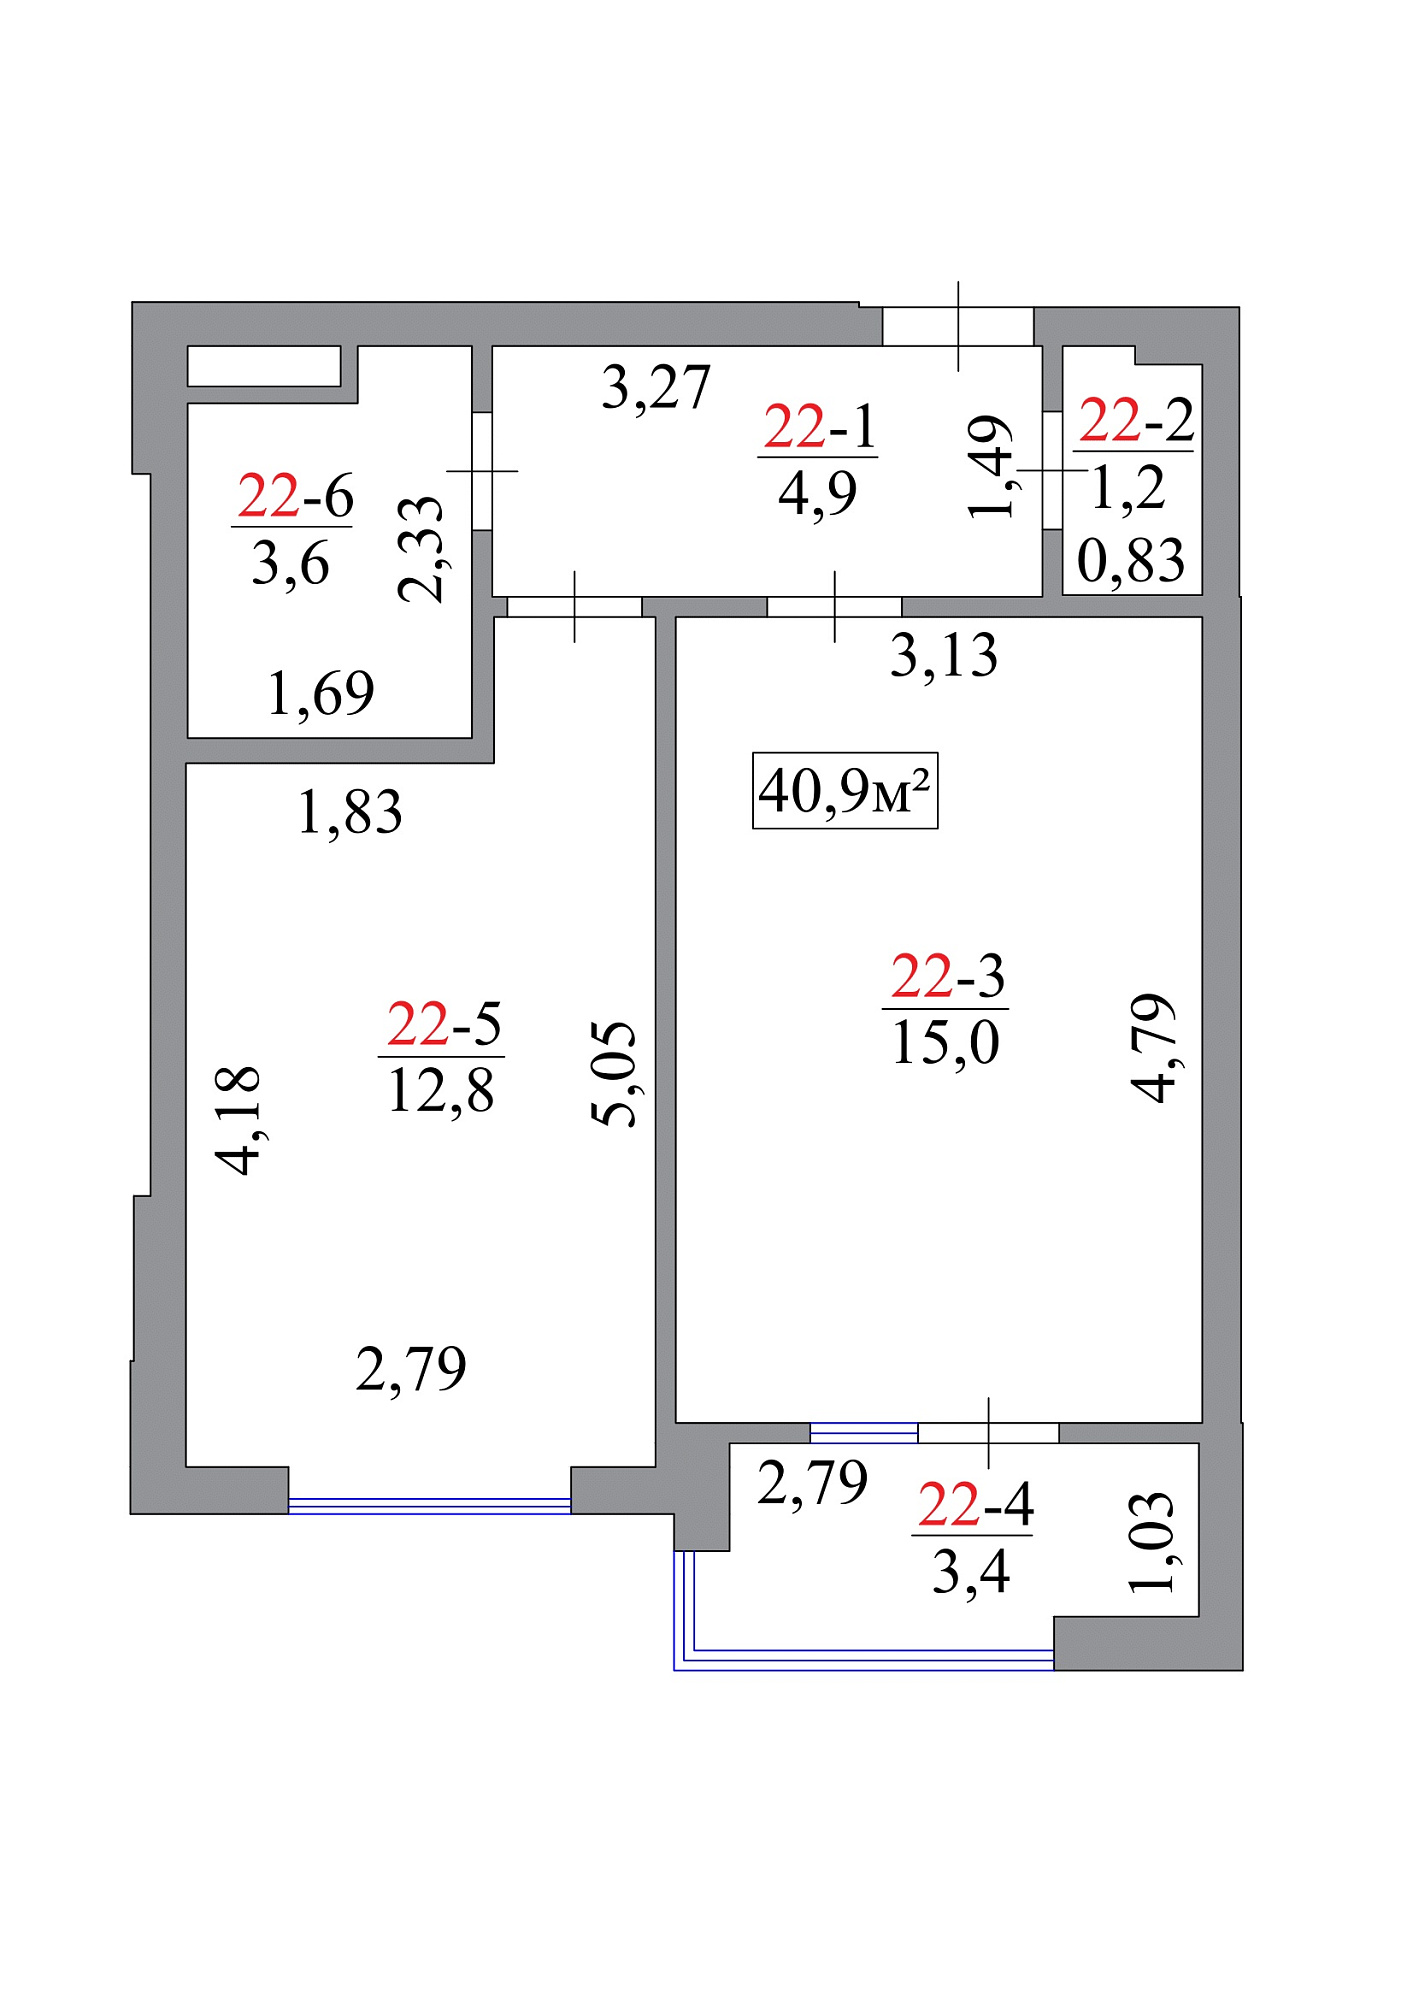 Planning 1-rm flats area 40.9m2, AB-07-03/00020.